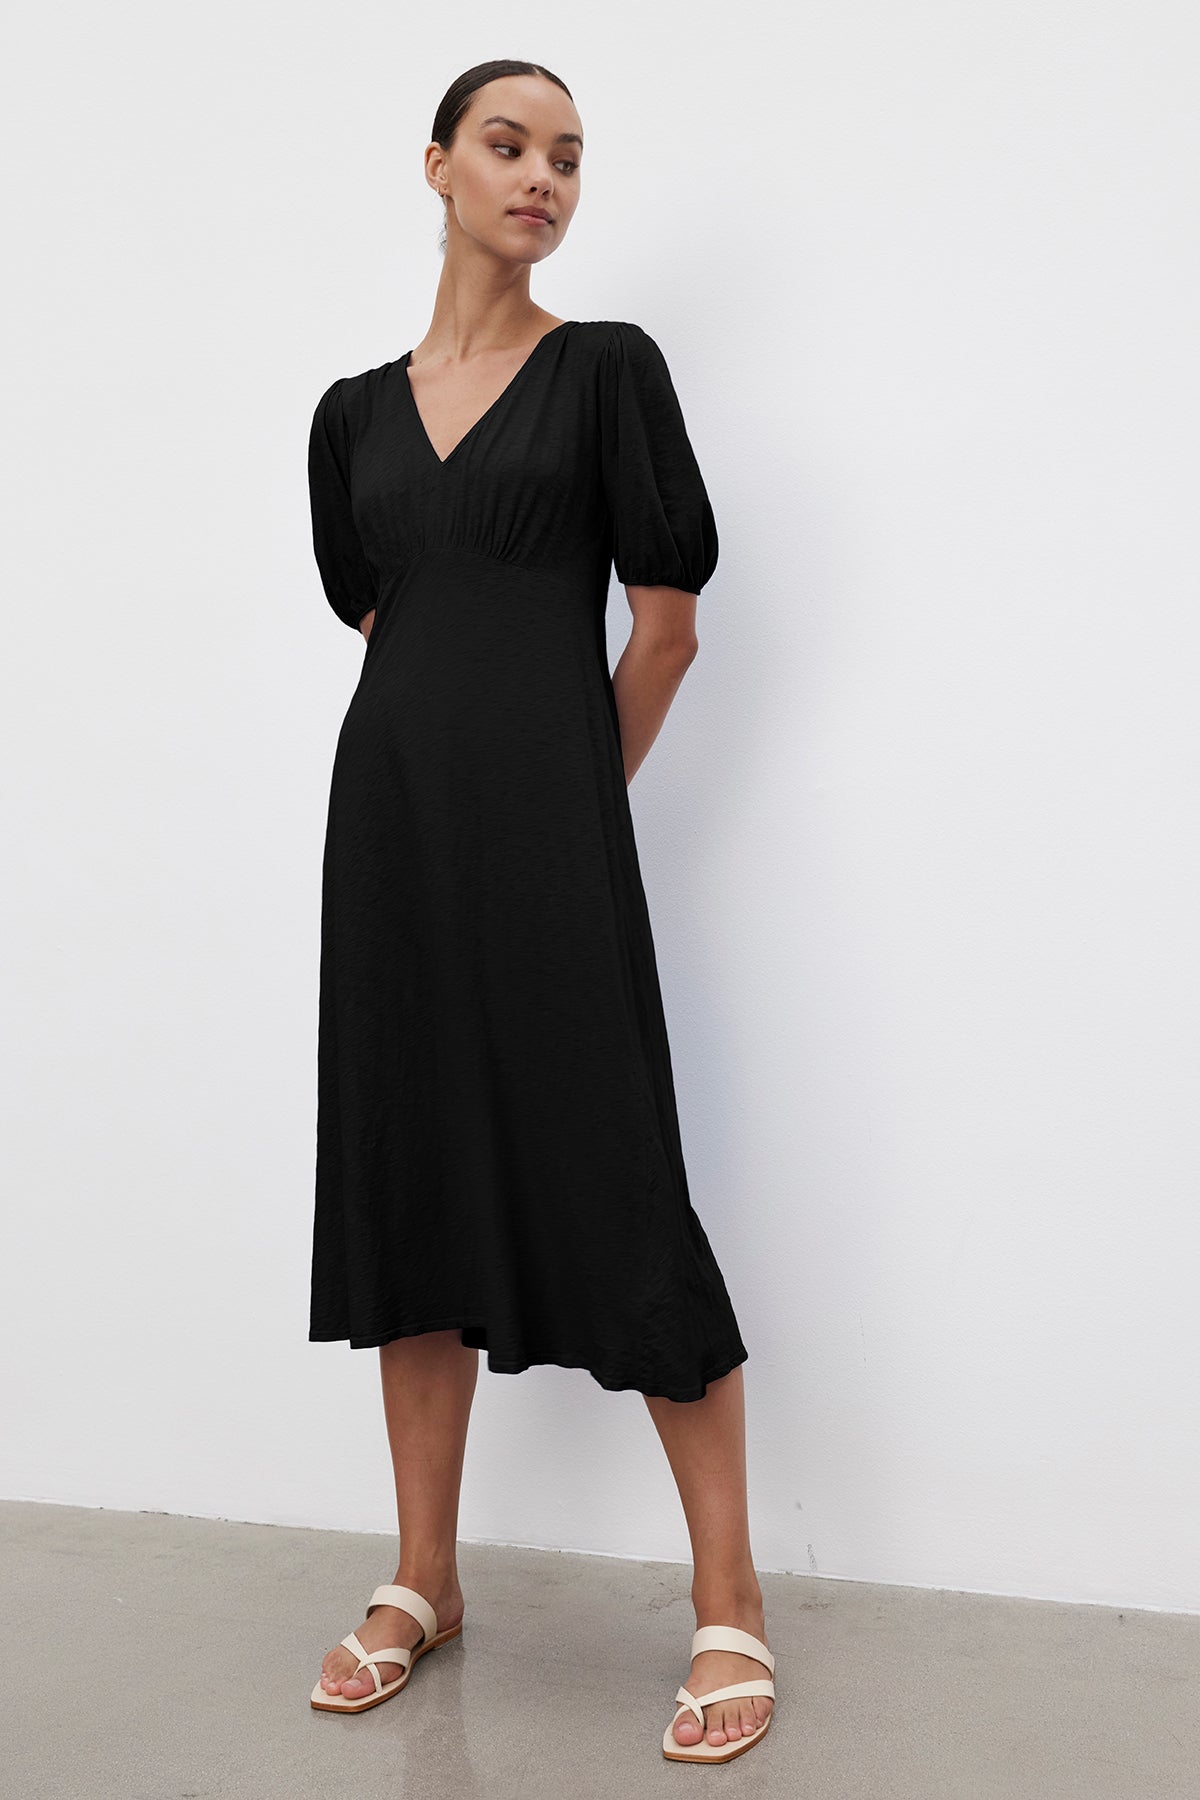   A person stands against a white background wearing the Velvet by Graham & Spencer PARKER COTTON SLUB MIDI DRESS with short, puffed sleeves and white sandals, with hands behind their back. 